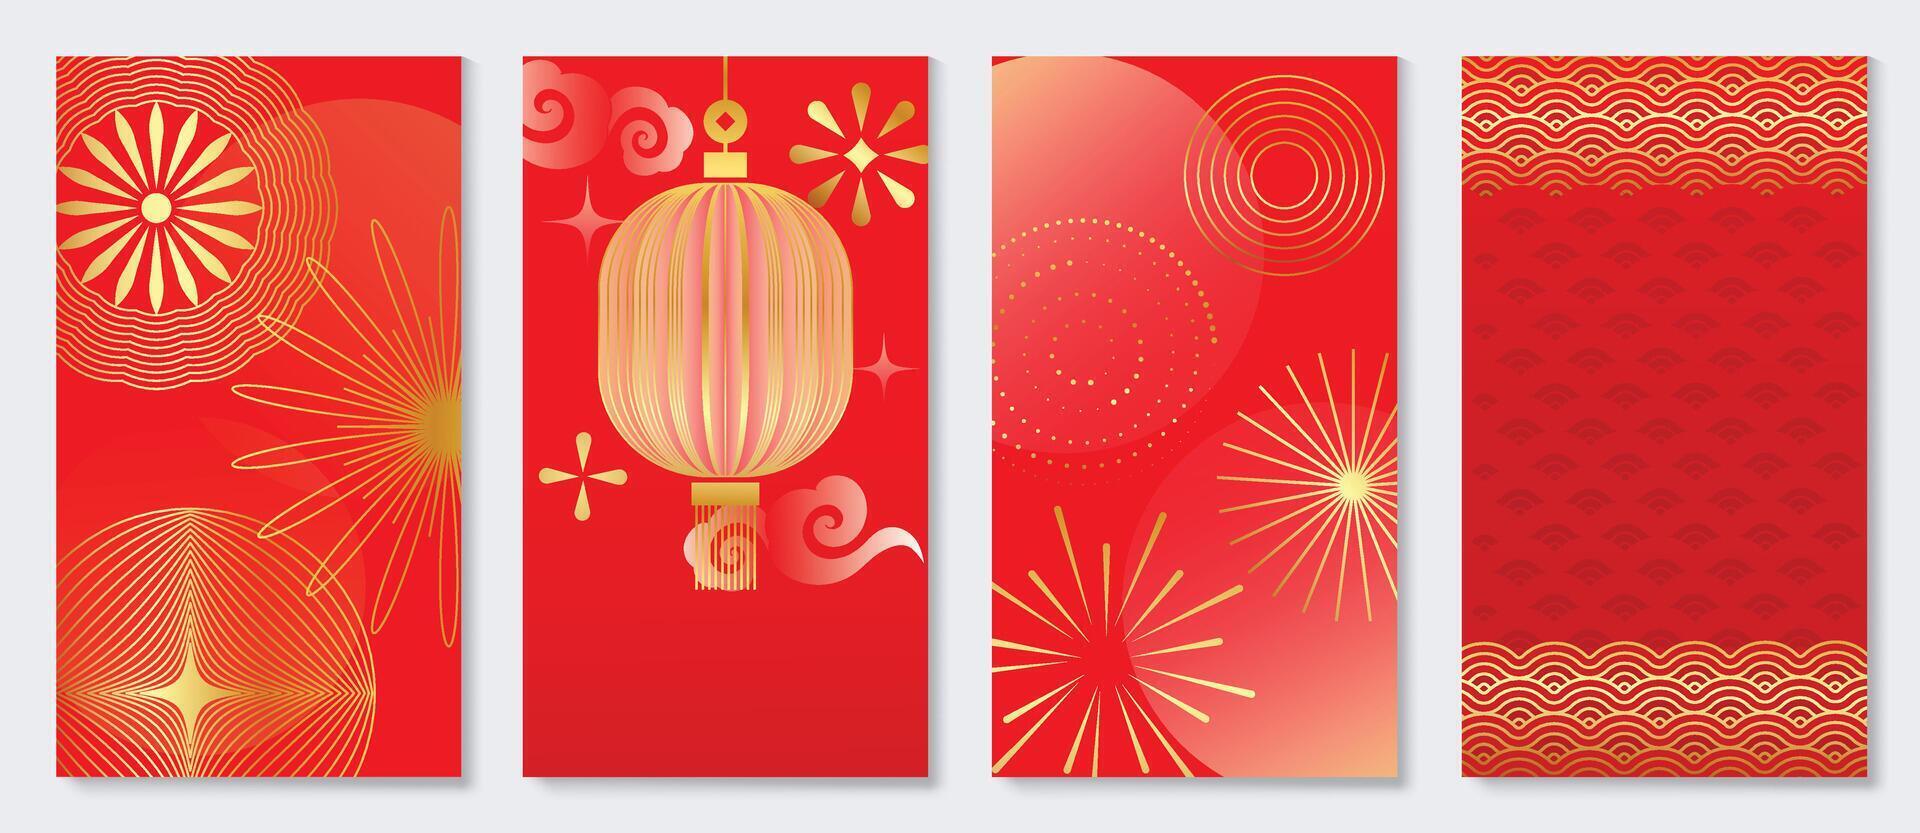 Chinese New Year cover background vector. Luxury background design with chinese pattern, flower, lantern cloud, firework. Modern oriental illustration for cover, banner, website, social media. vector